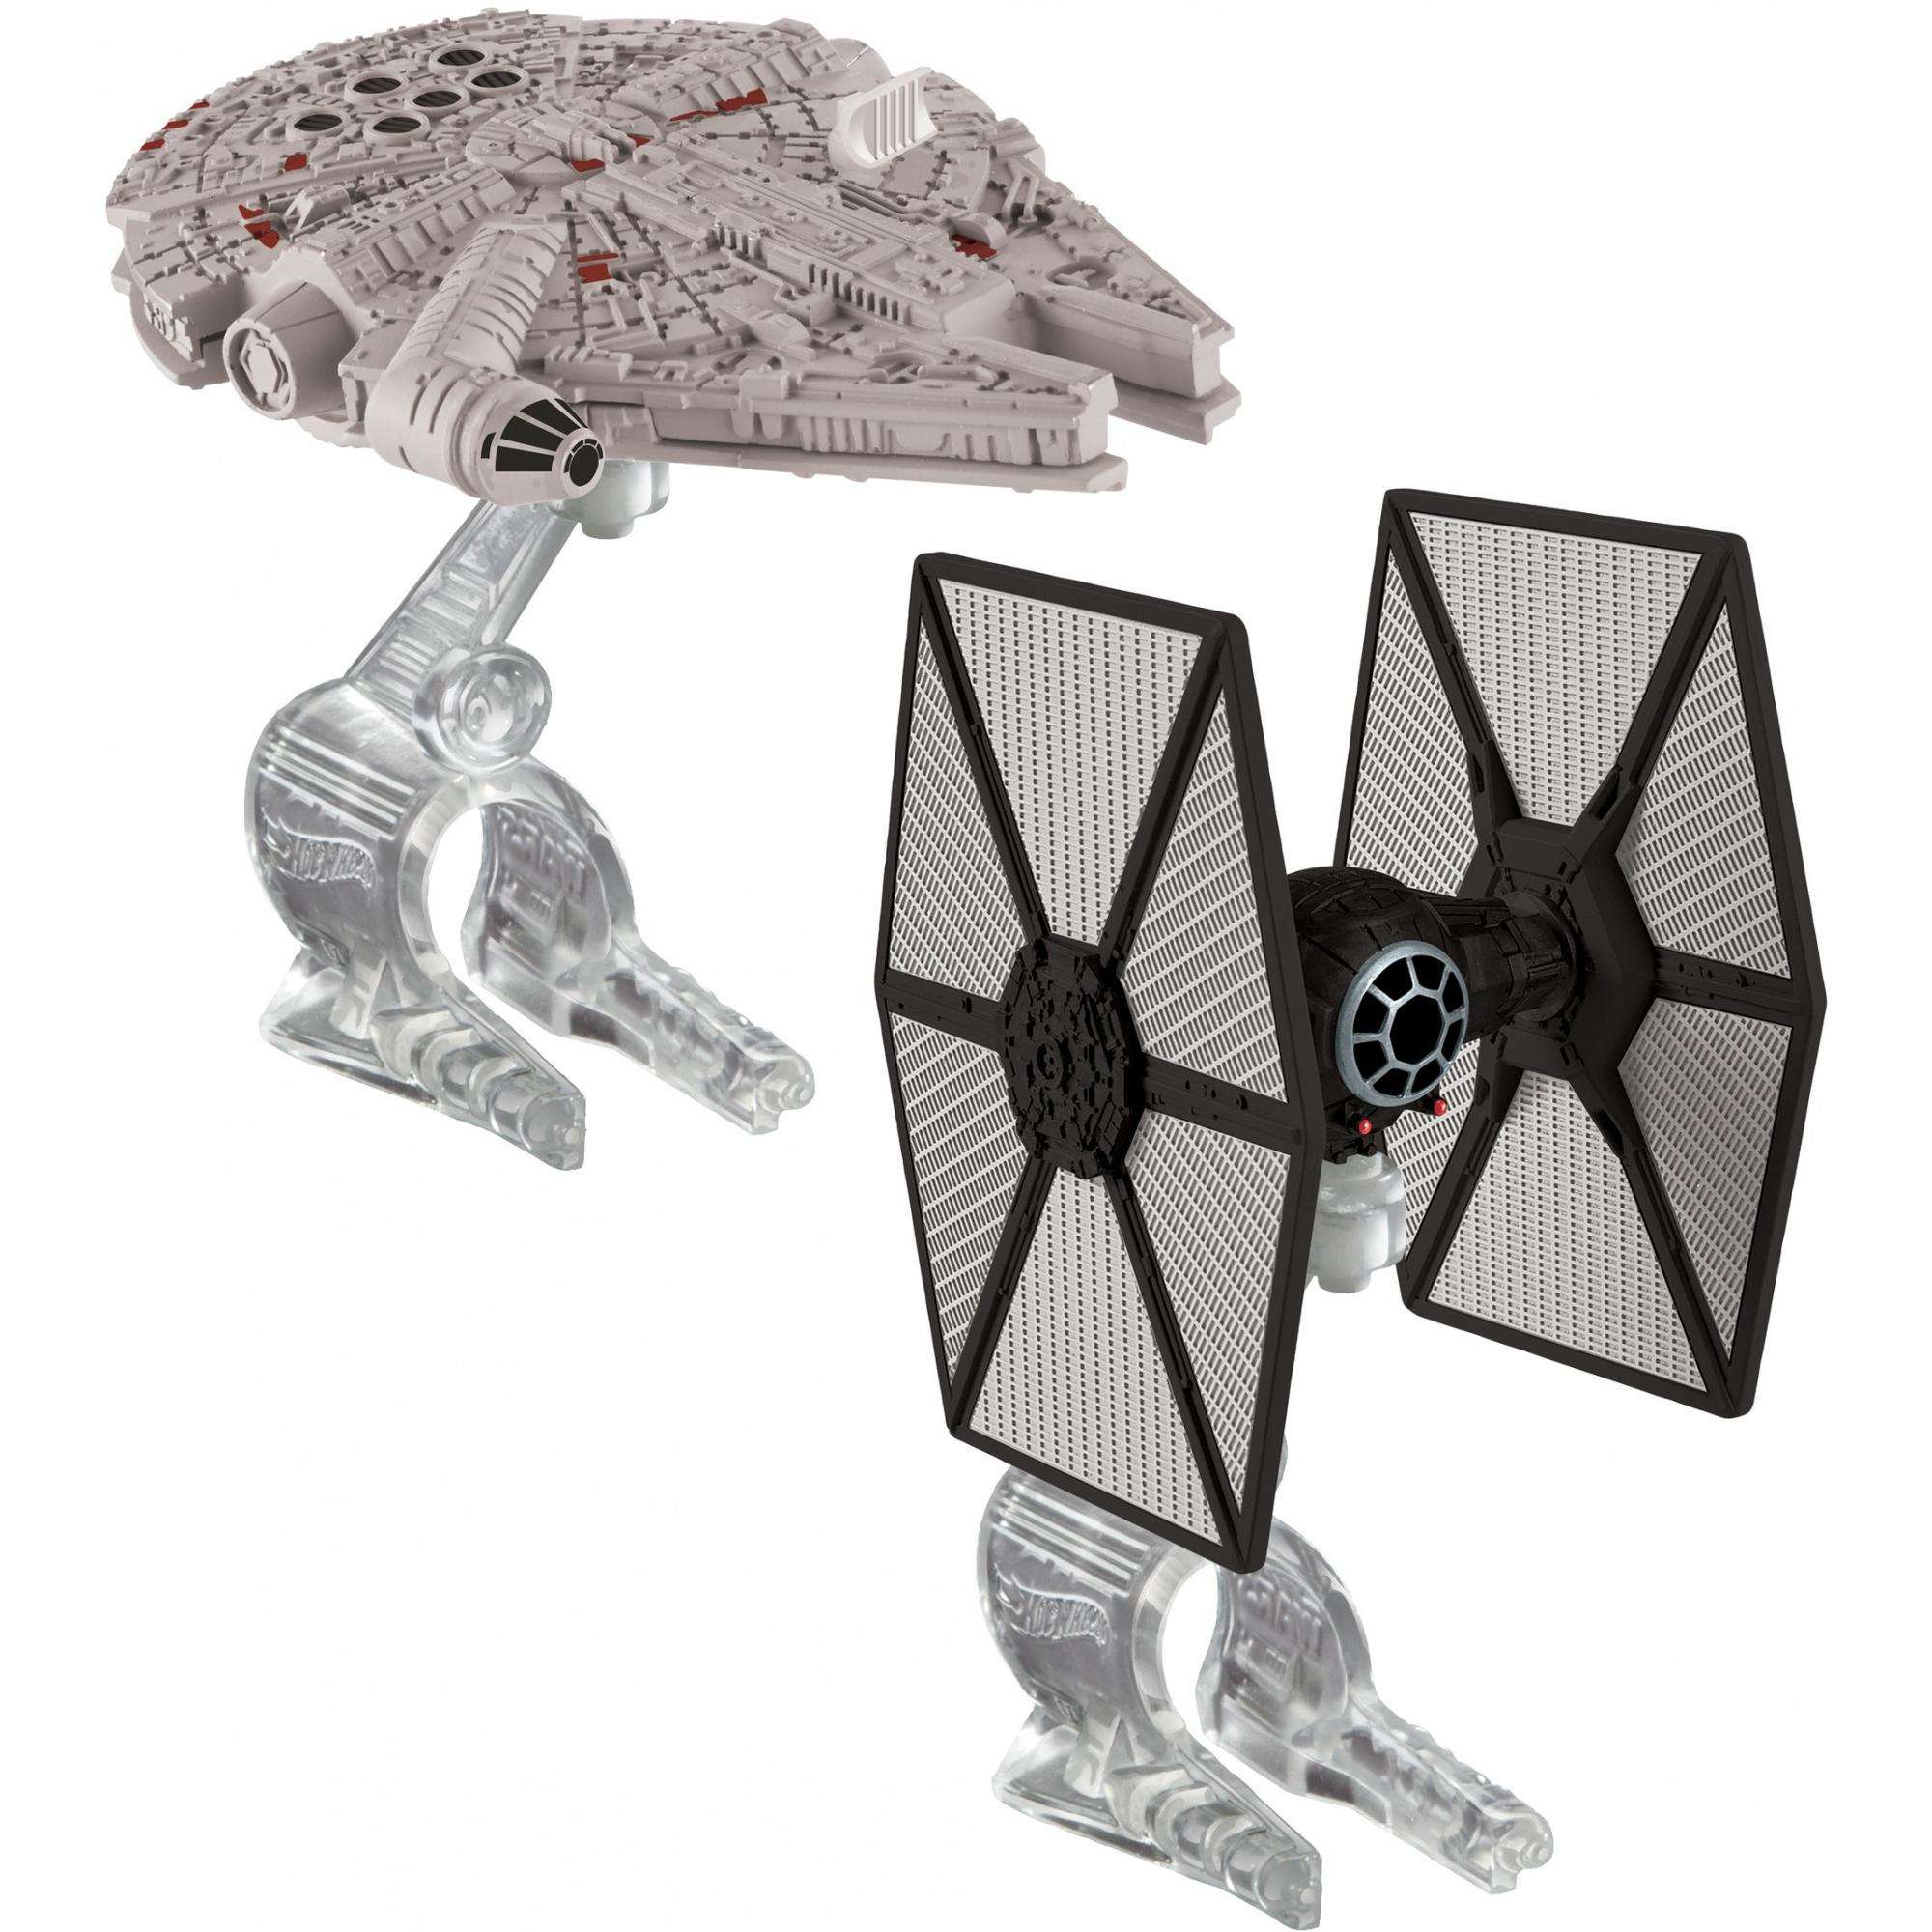 Hot Wheels Star Wars First Order Tie Fighter vs. Millennium Falcon - image 1 of 5